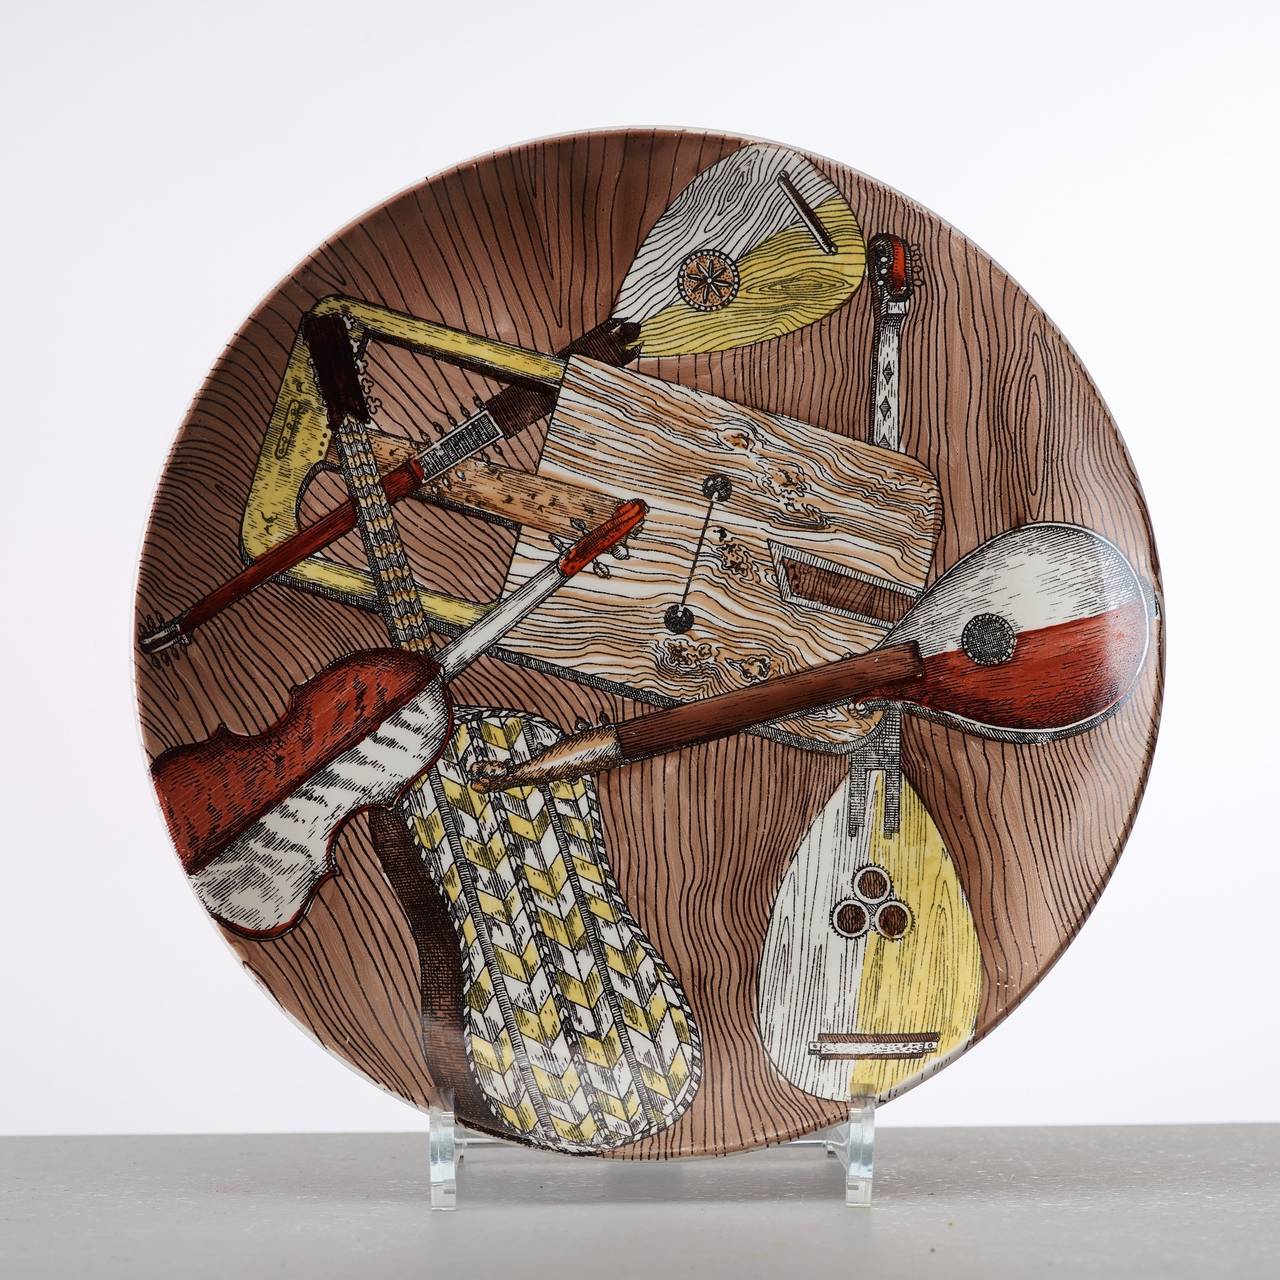 The plates are numbered 1-6, and each depicts a different selection of stringed instruments including guitars and lutes on a faux bois ground. 

Strumenti Musicali translates as Musical Instruments.

Reference: Fornasetti: The Complete Universe,